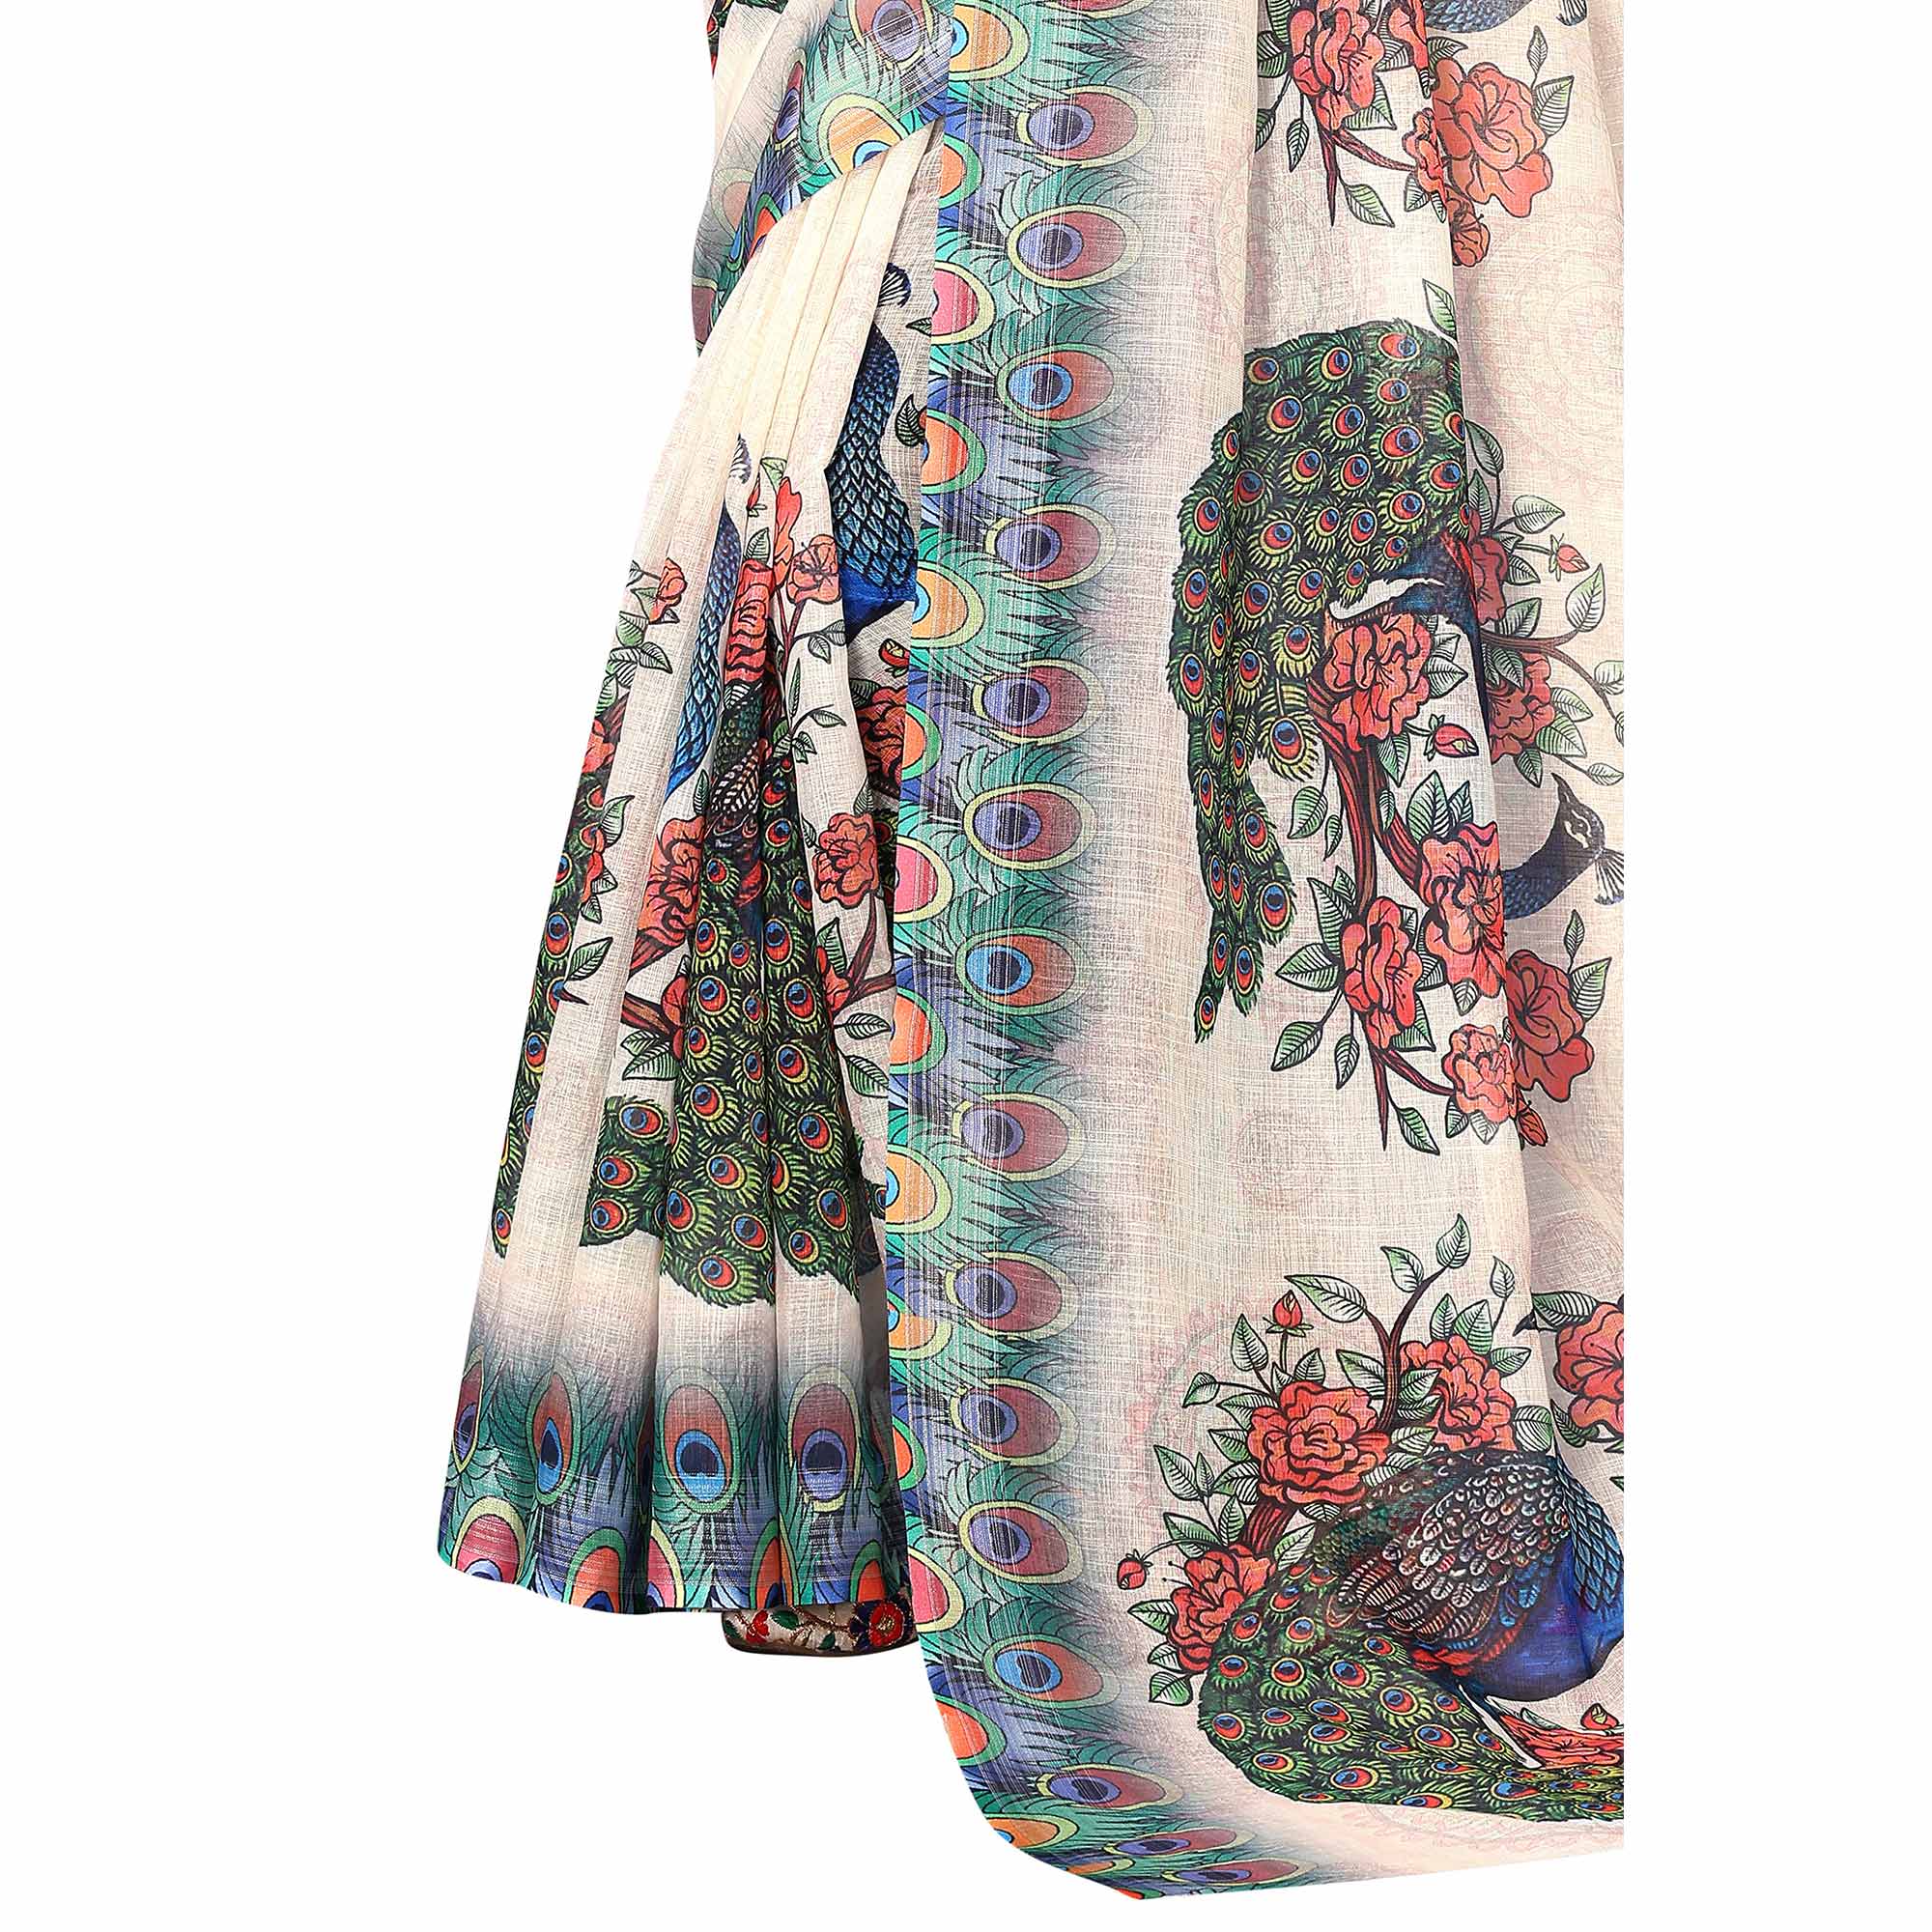 Off White Digital Floral Printed Linen Saree